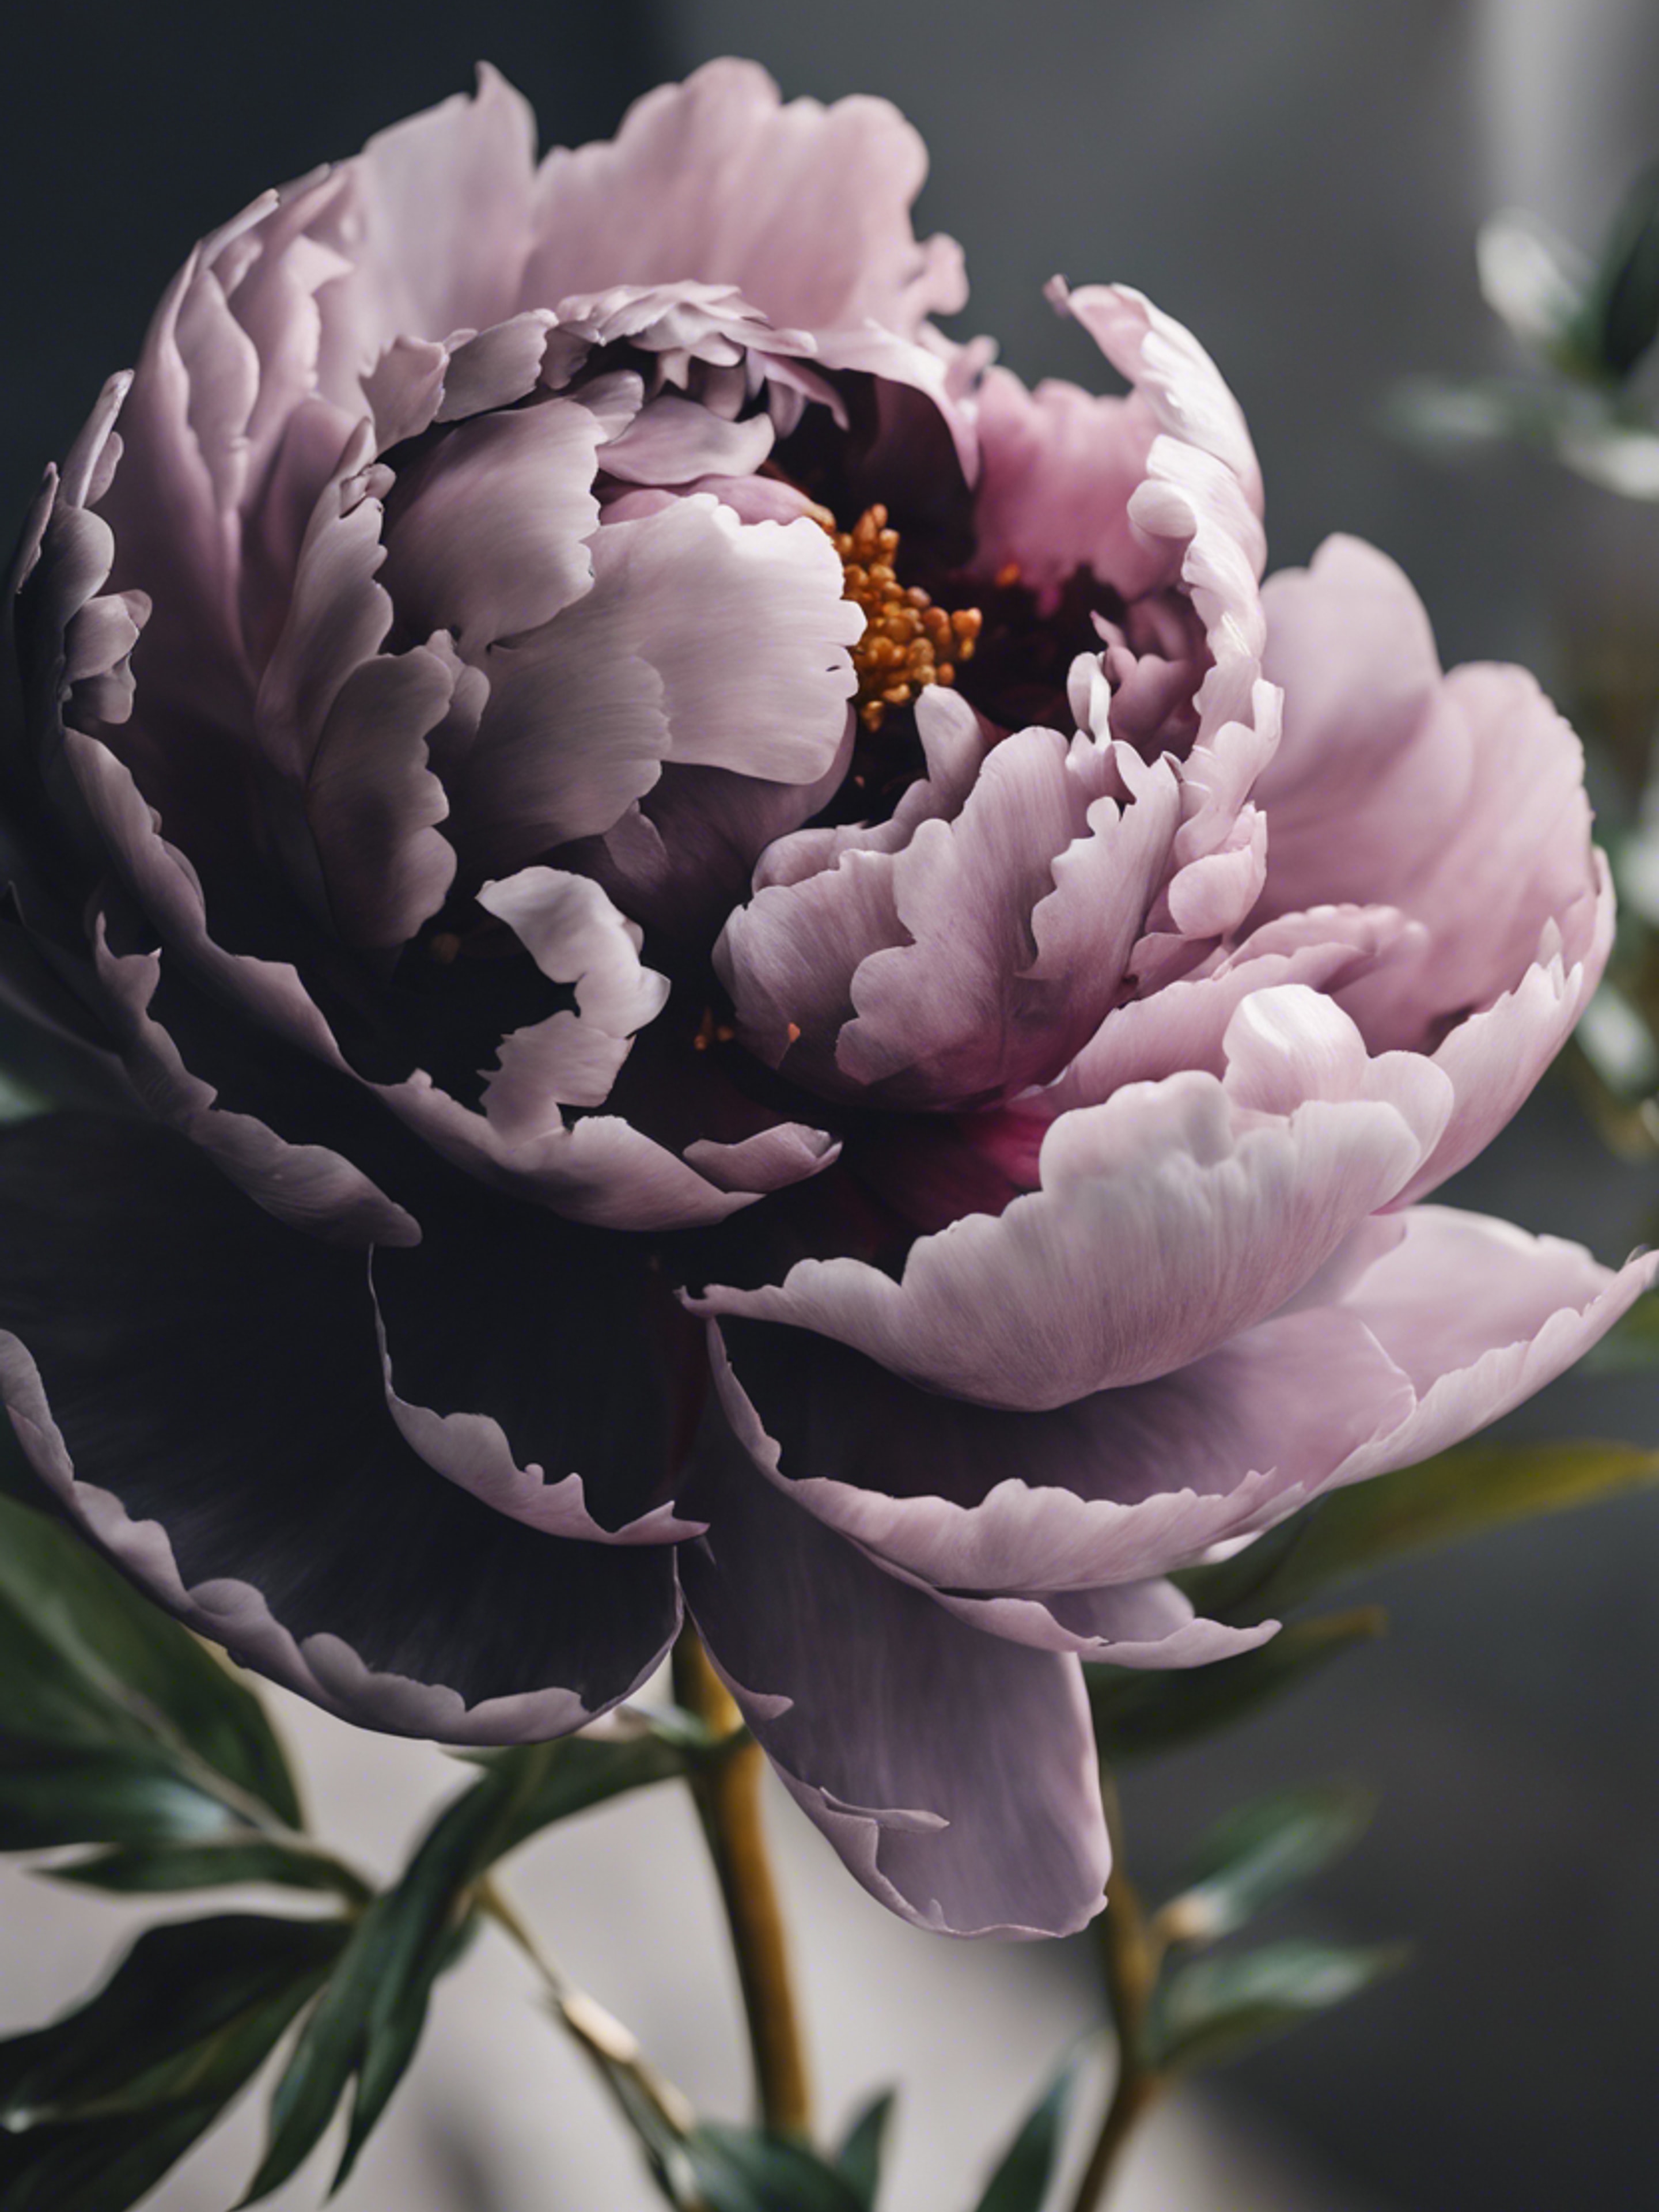 A black peony, the symbol of prosperity and honor, complementing a traditional Asian painting.壁紙[2c78f74174874eadaf7e]